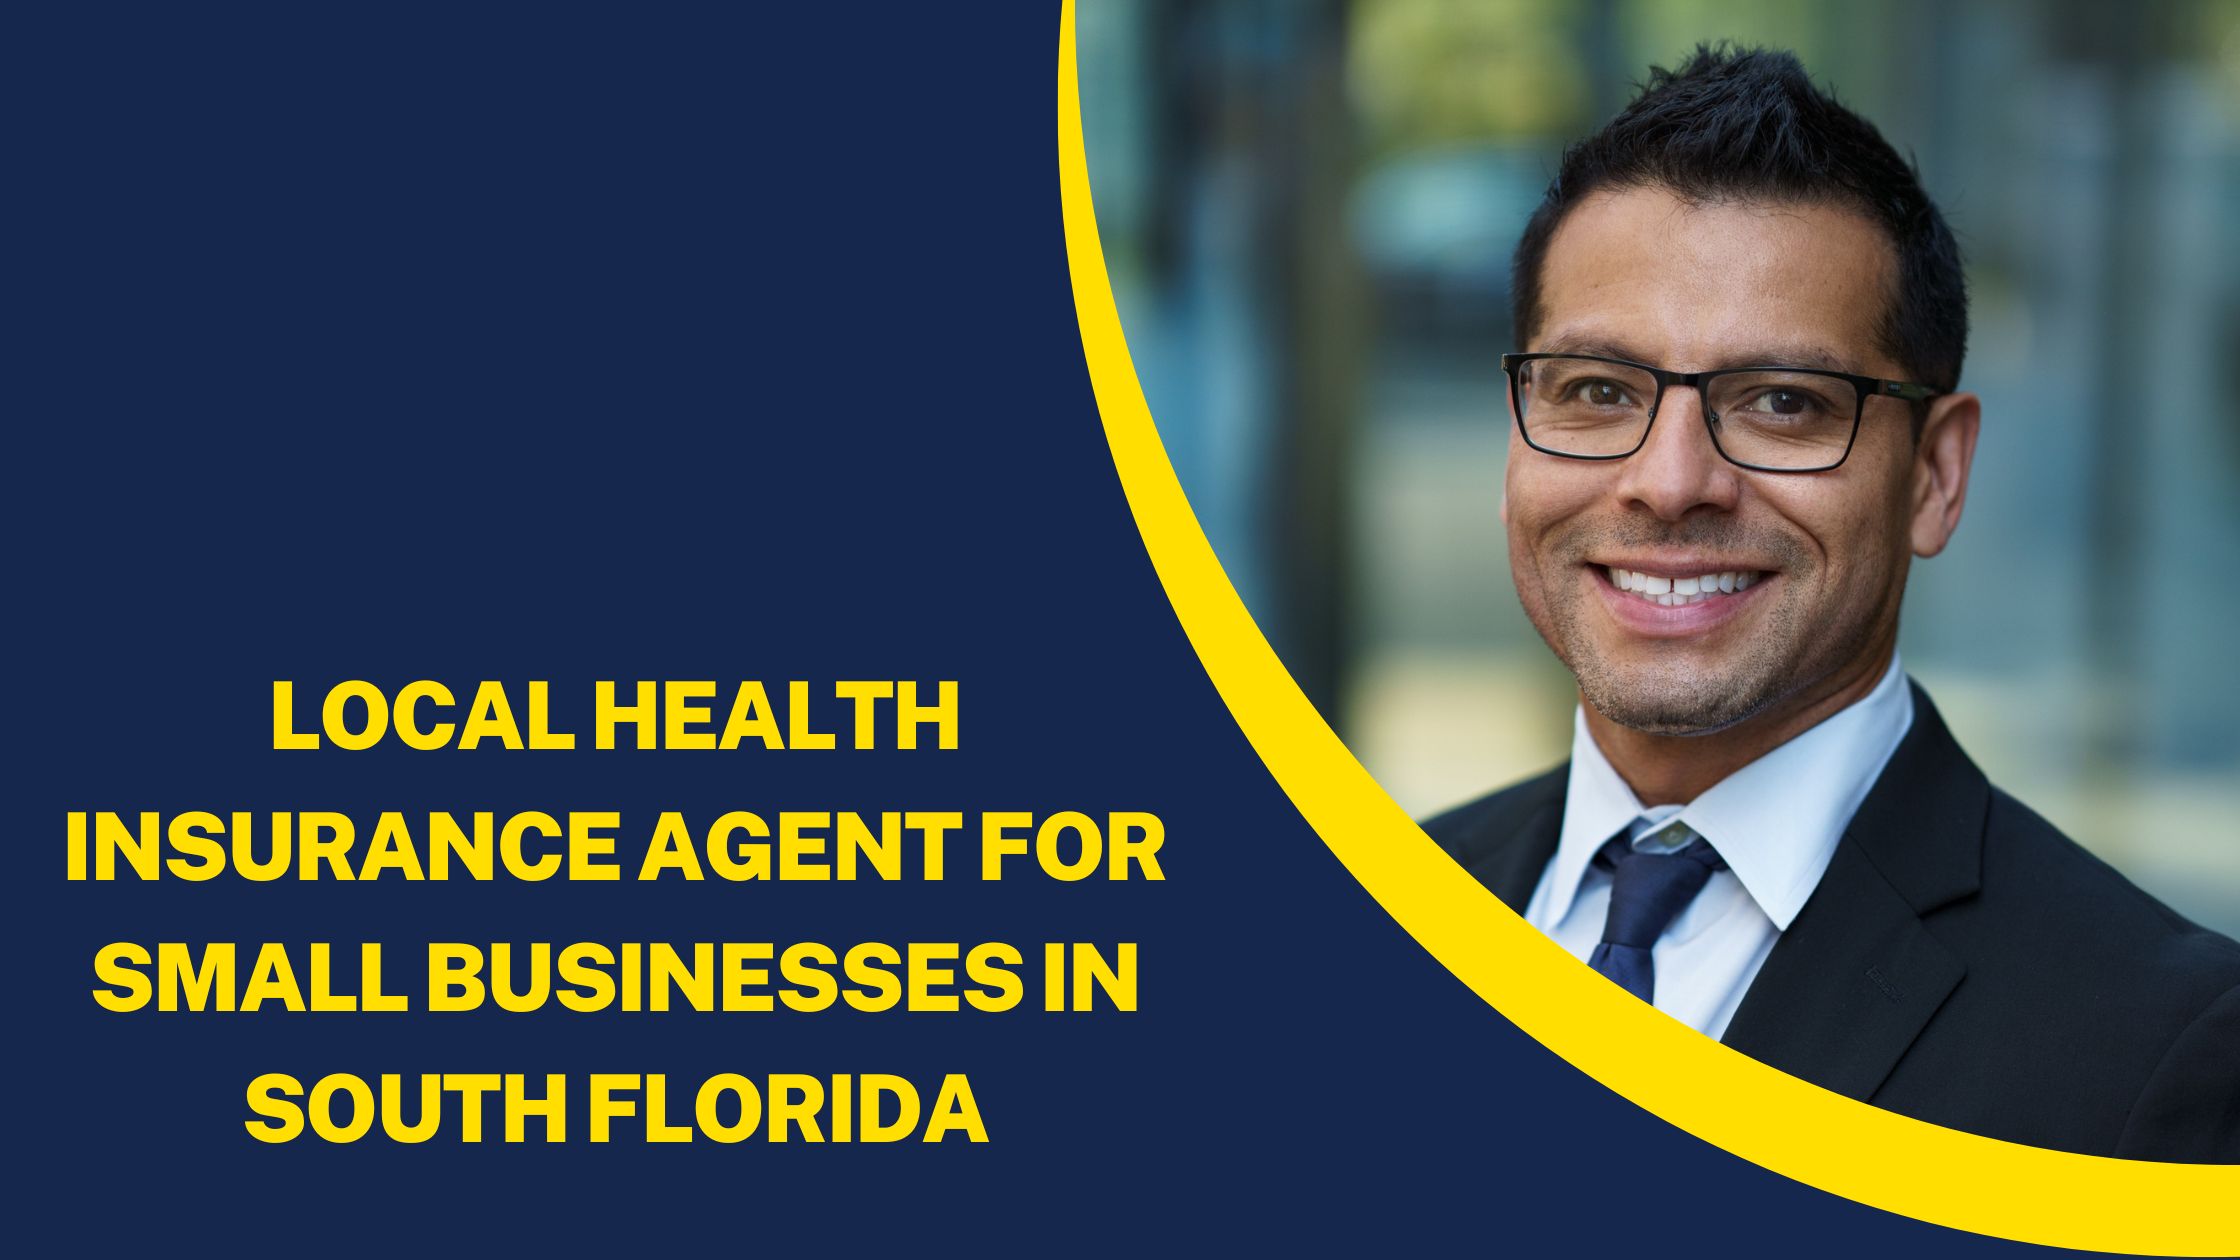 Local Health Insurance Agent for Small Businesses in South Florida